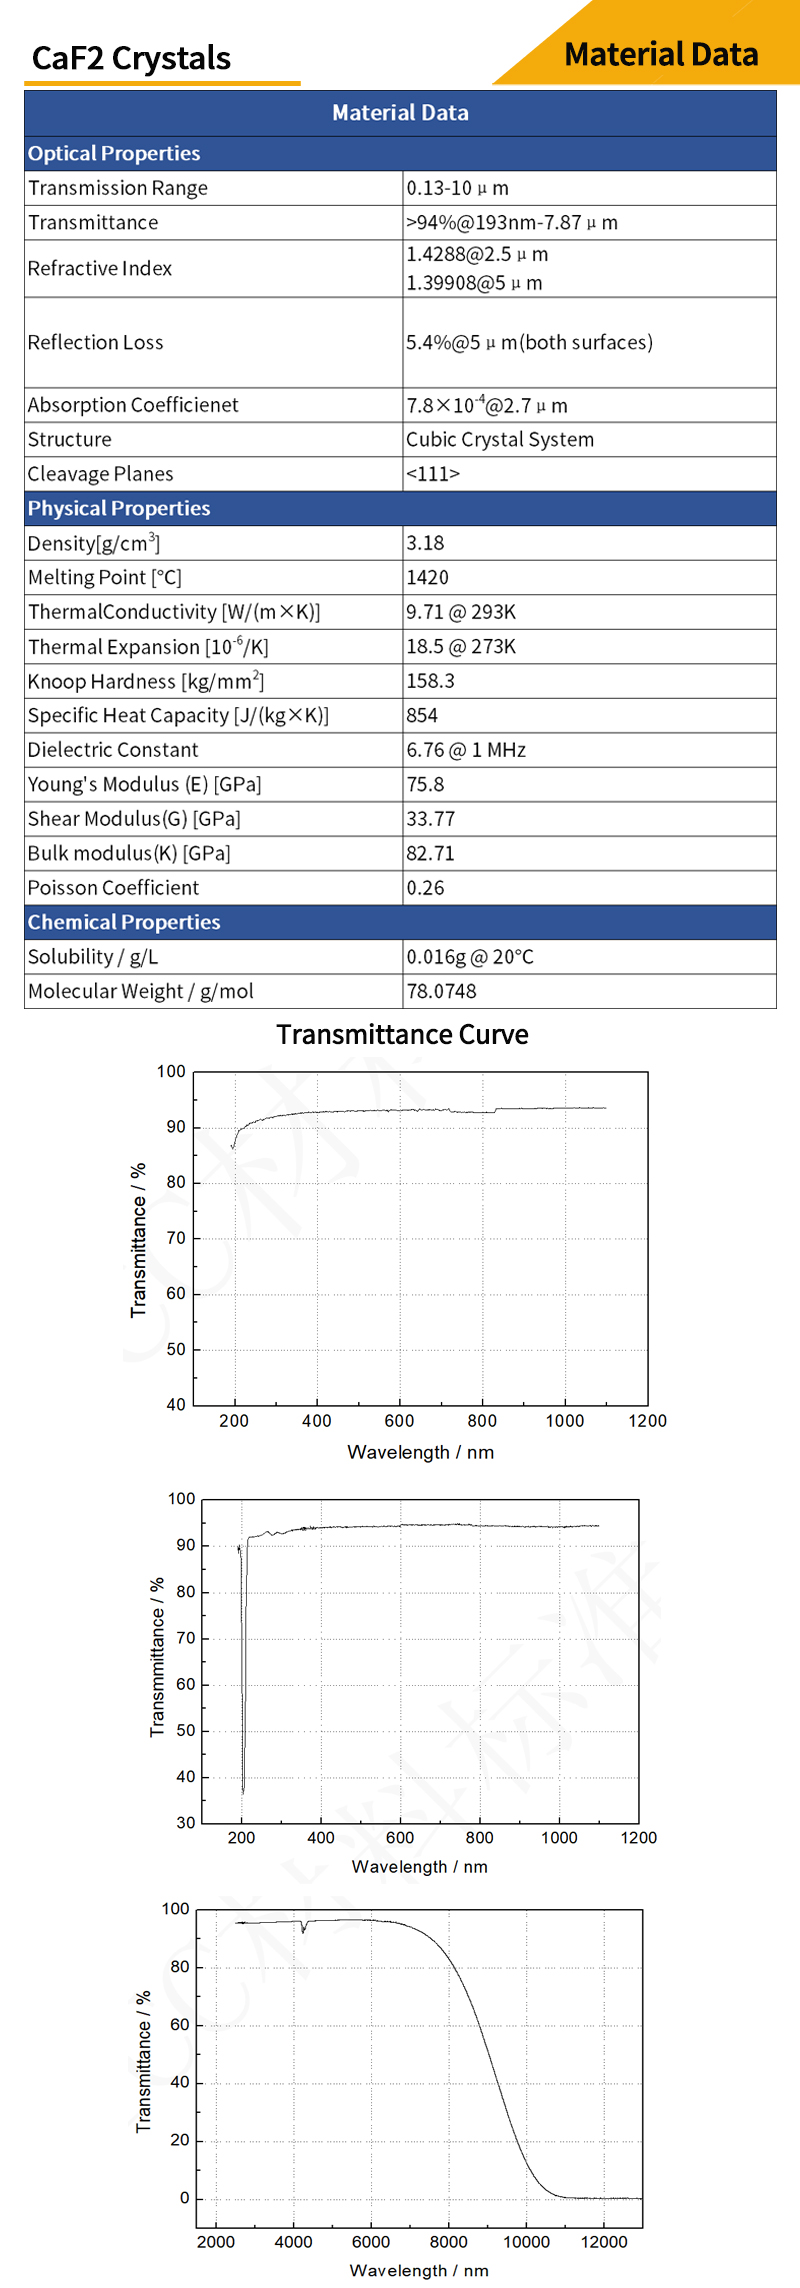 Infrared calcium fluoride material data and transmittance curves